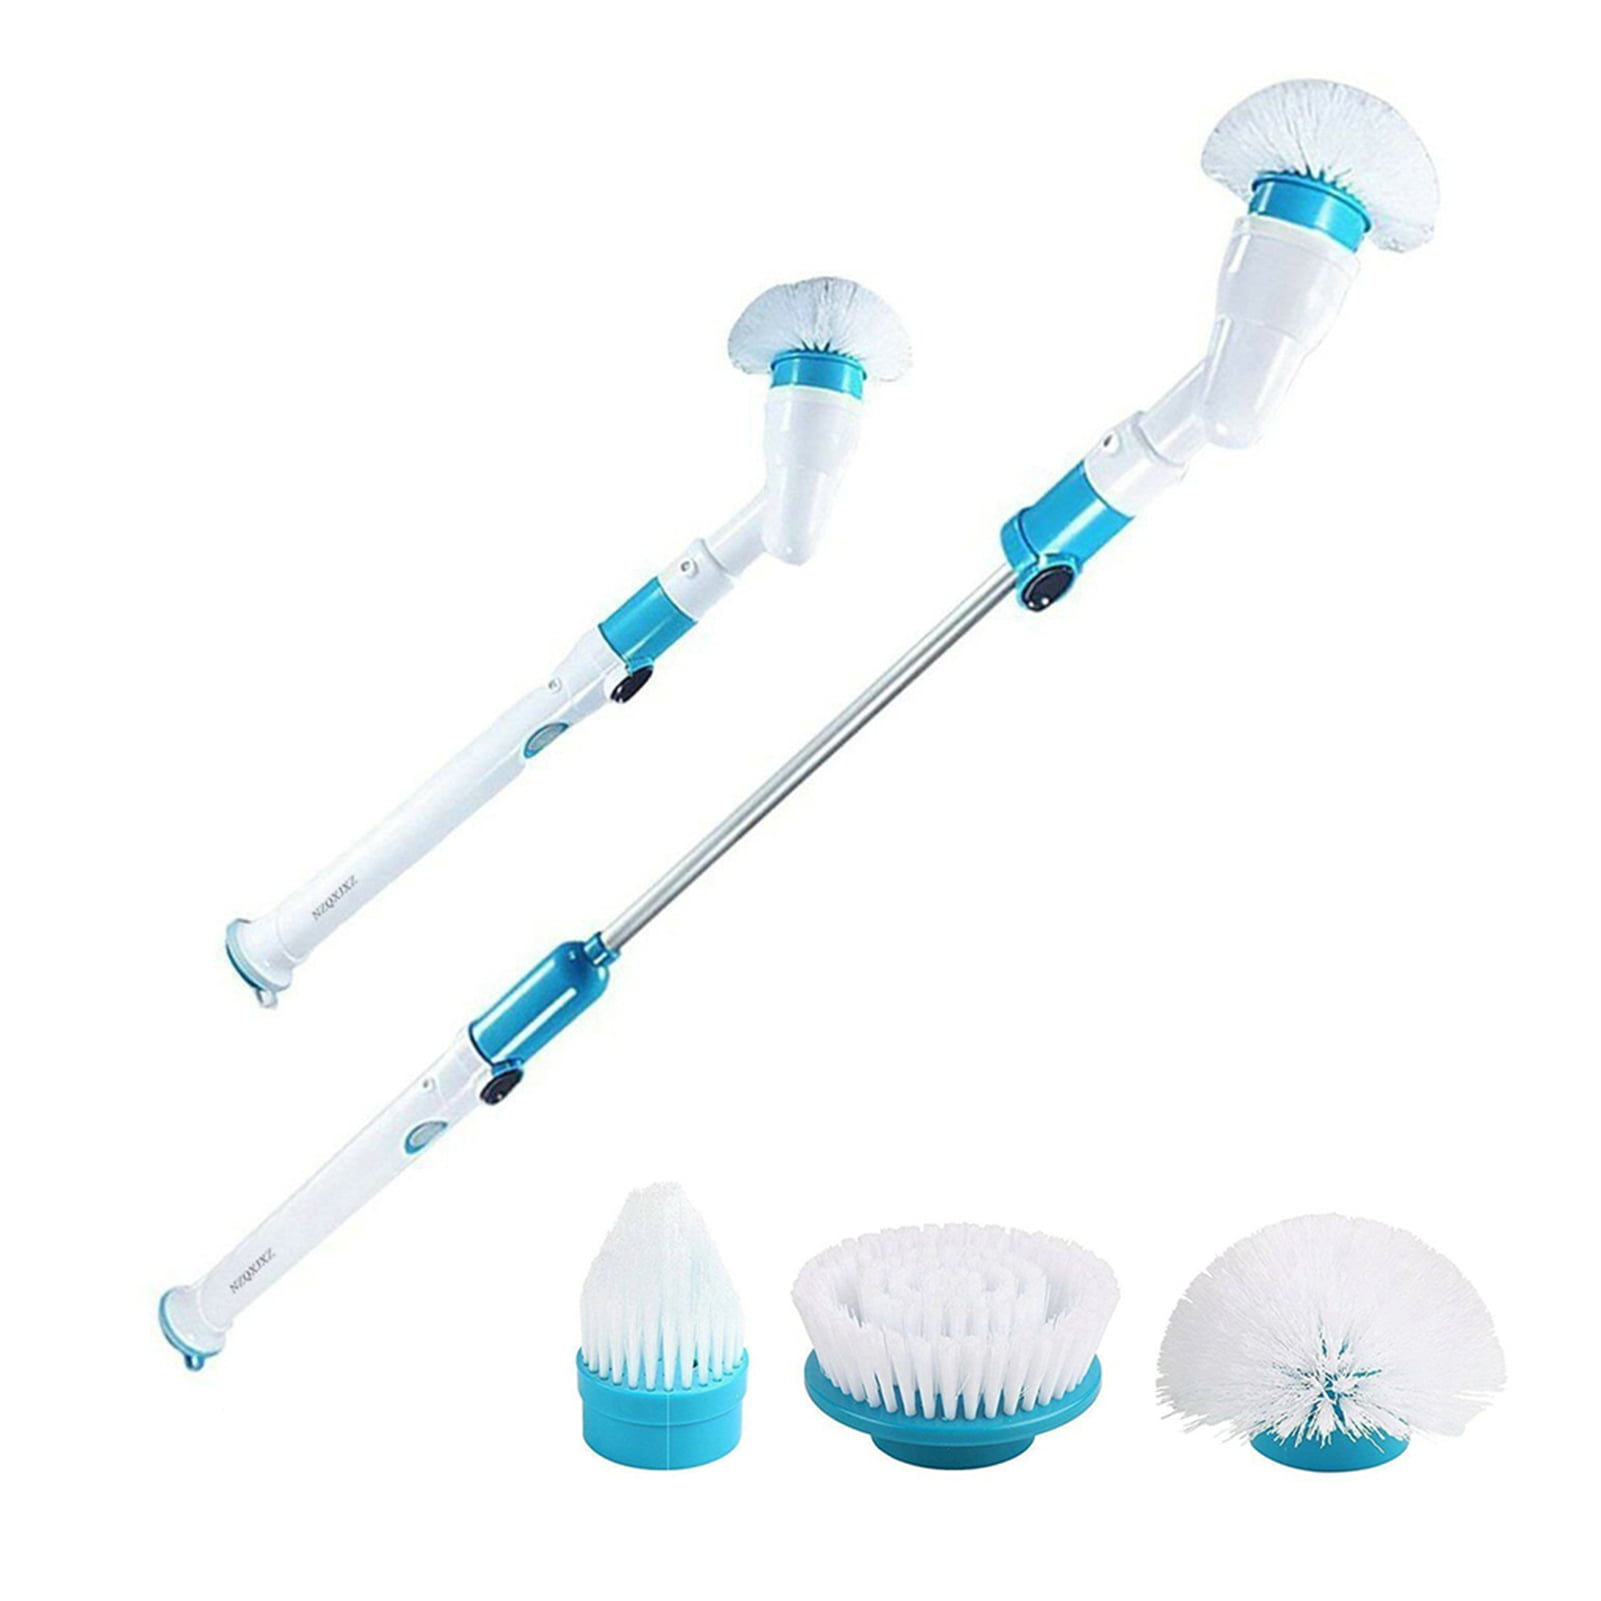 Electric Spin Scrubber 360 Cordless Bathroom Cleaning Brush With 4 Replaceable Scrubber Brush Heads Extension Handle For Tub Tile Wall Bathroom Walmart Com